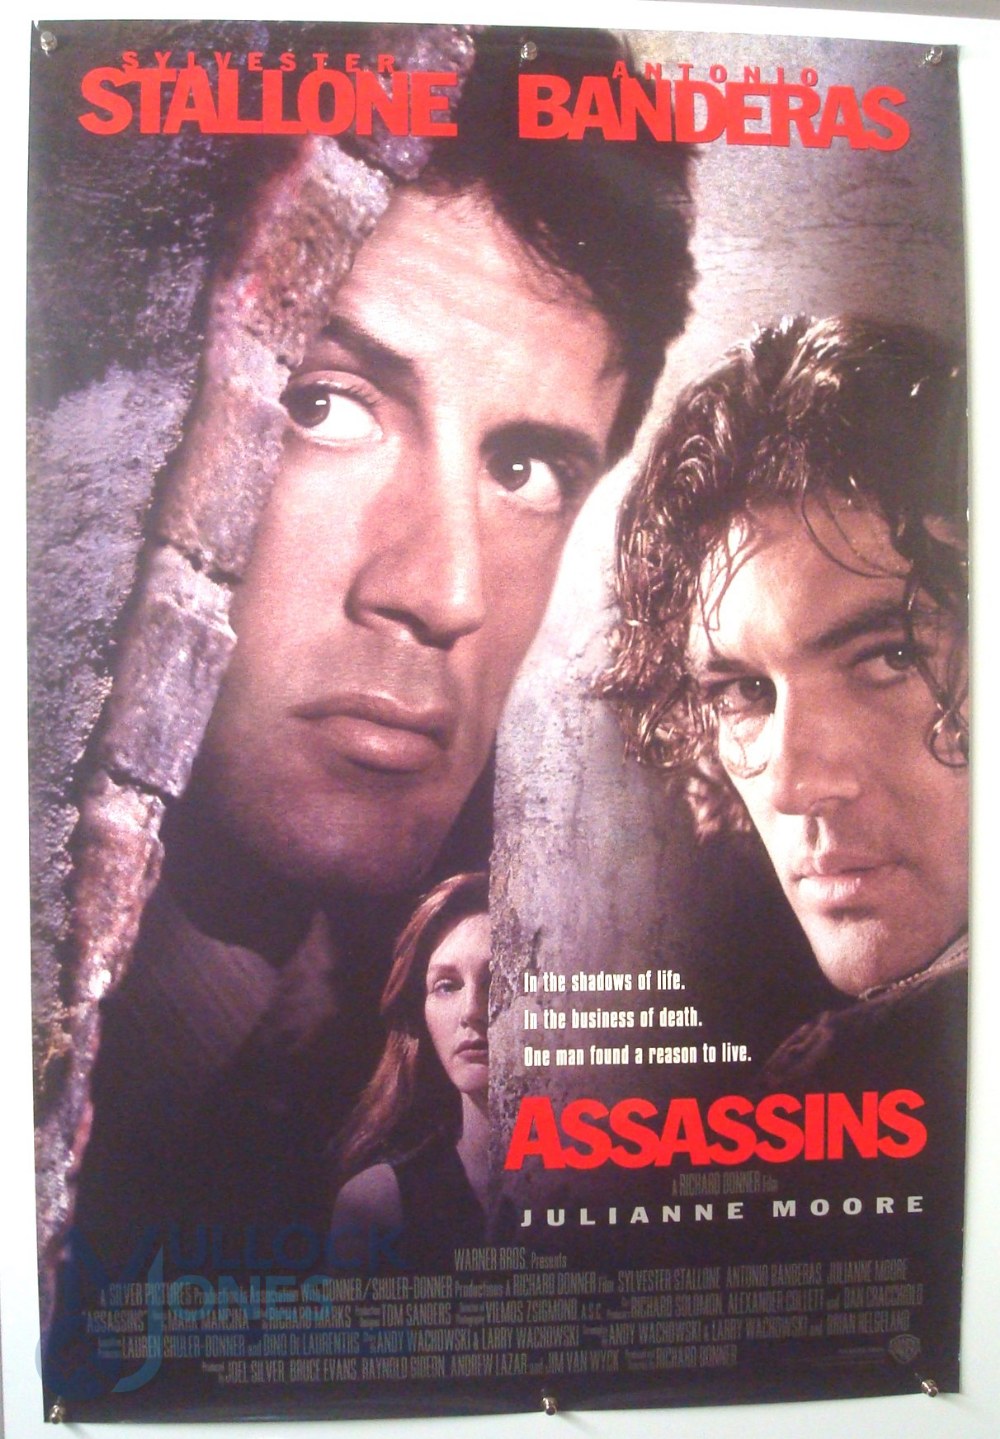 Original Movie/Film Poster - 1985 Assassins - 40x30" approx. kept rolled, creases apparent, Ex